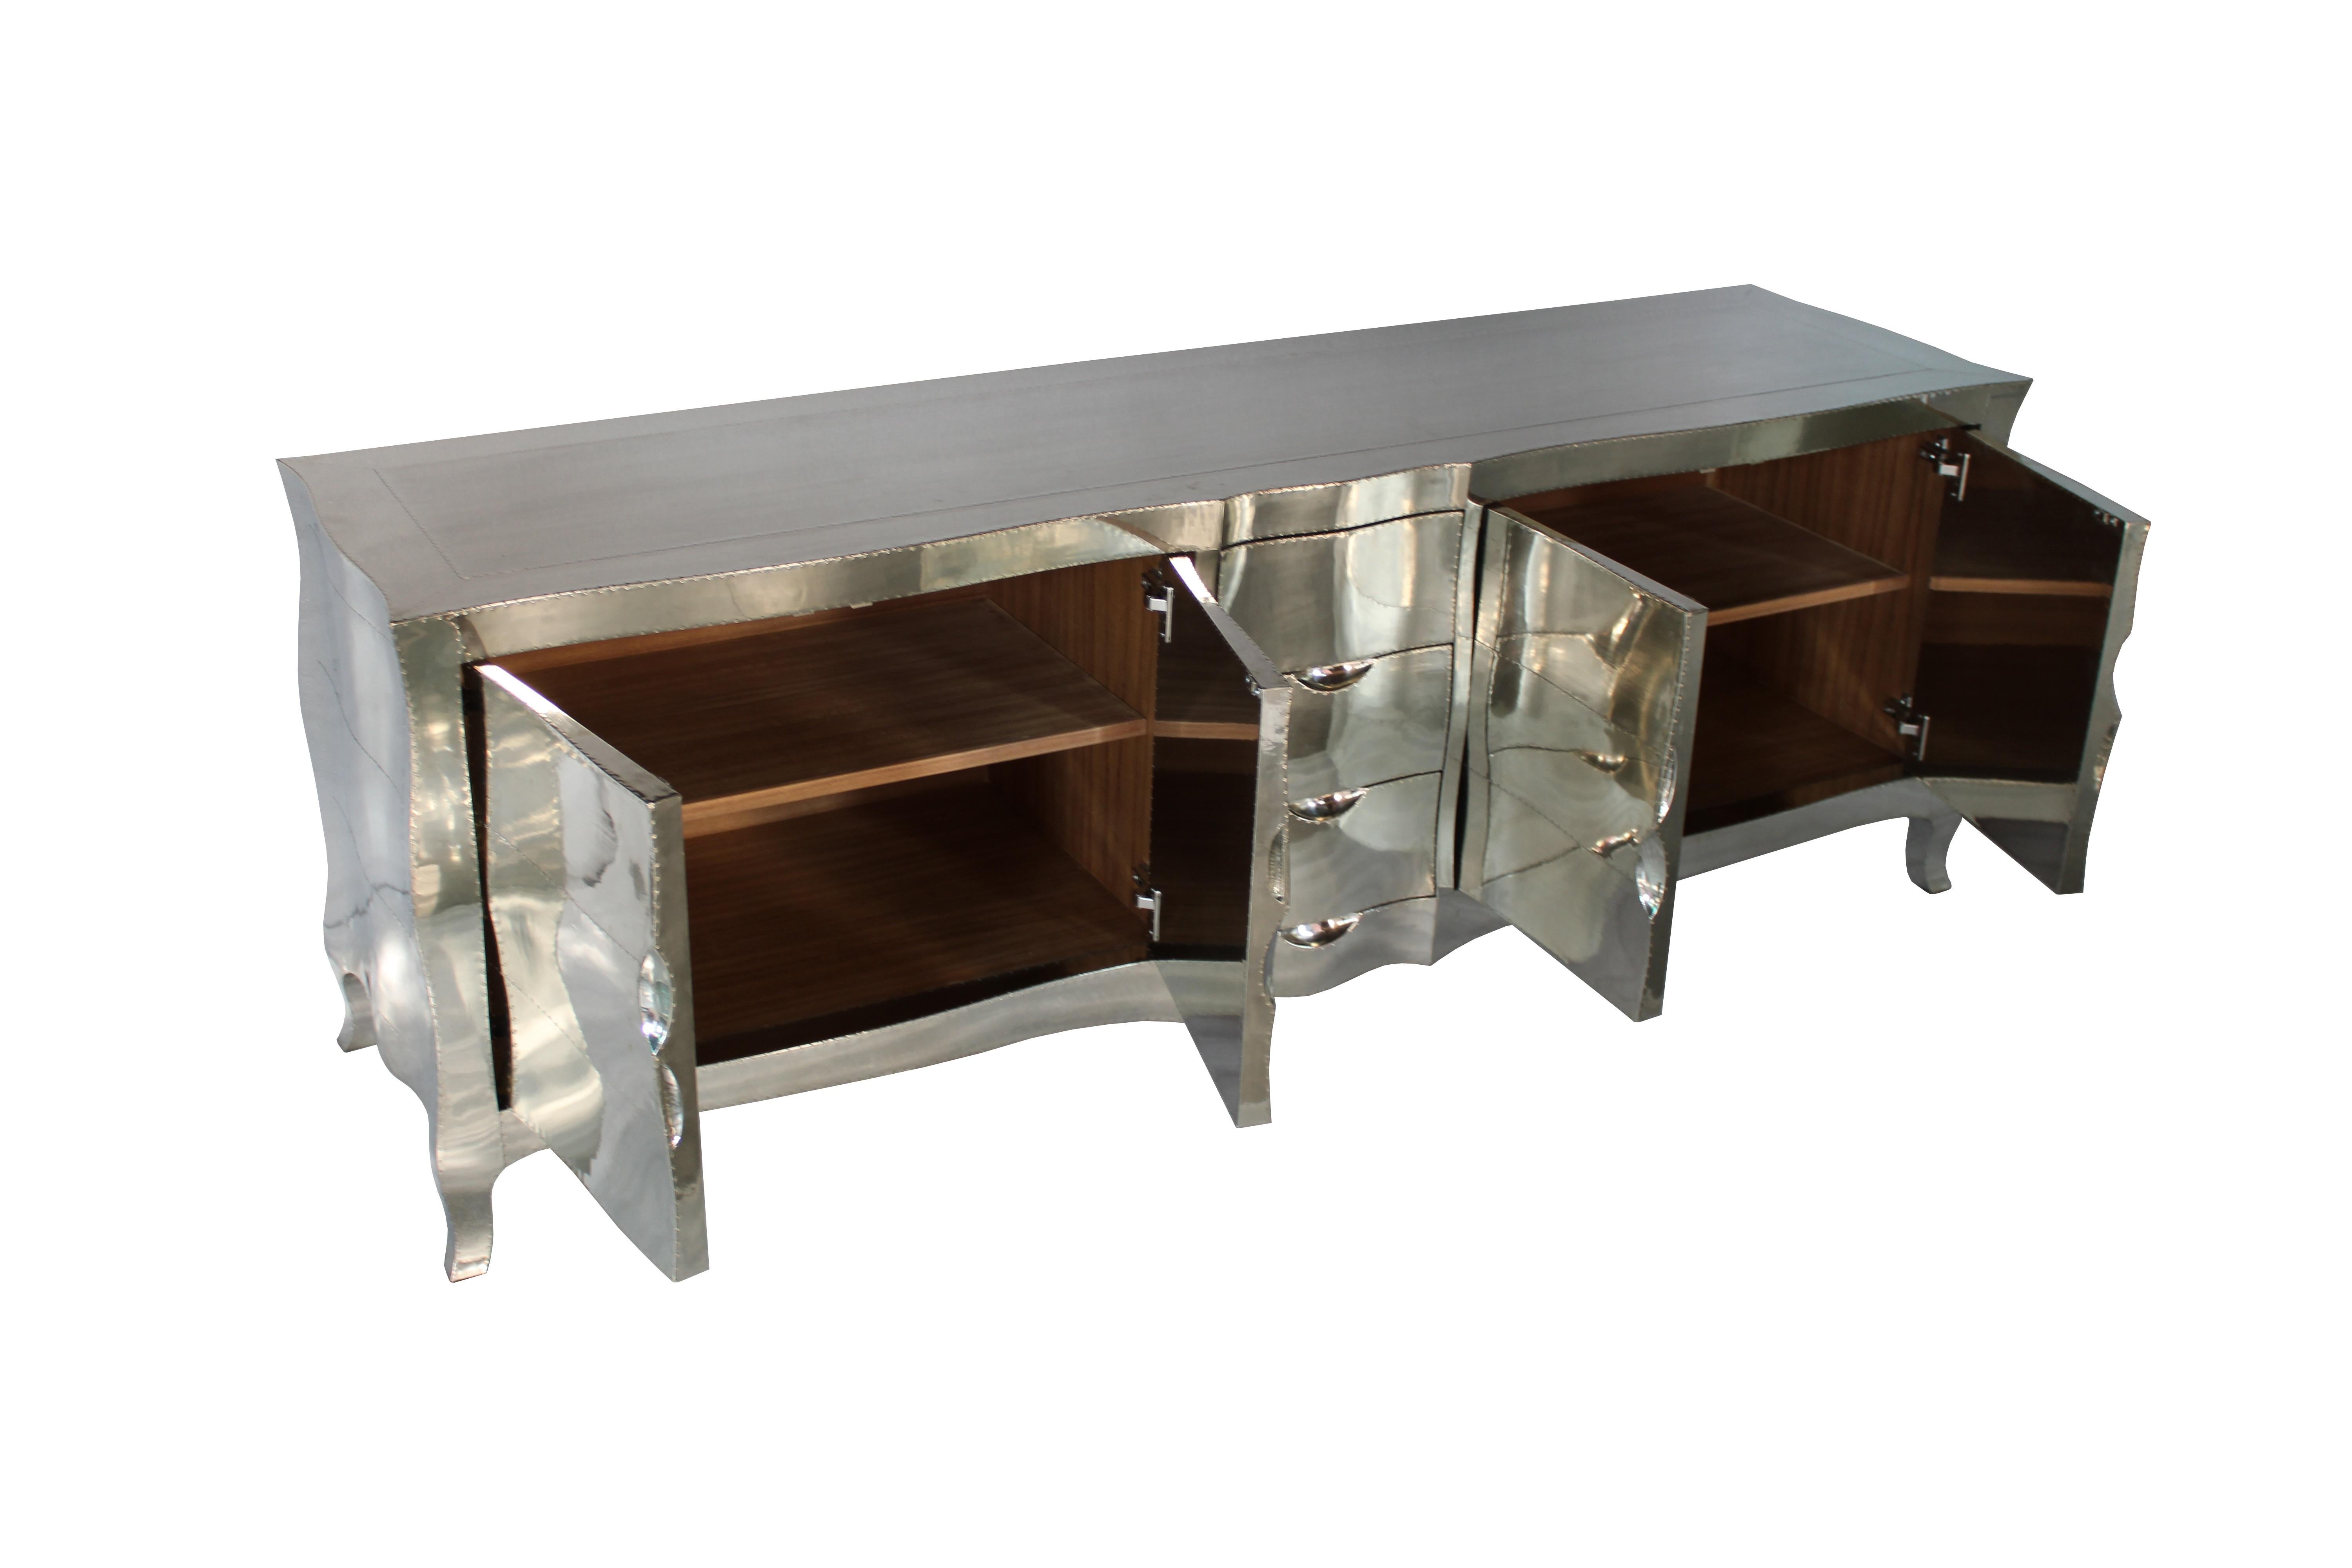 Louise Credenza Art Deco Sideboards in Mid. Hammered Copper by Paul Mathieu For Sale 6